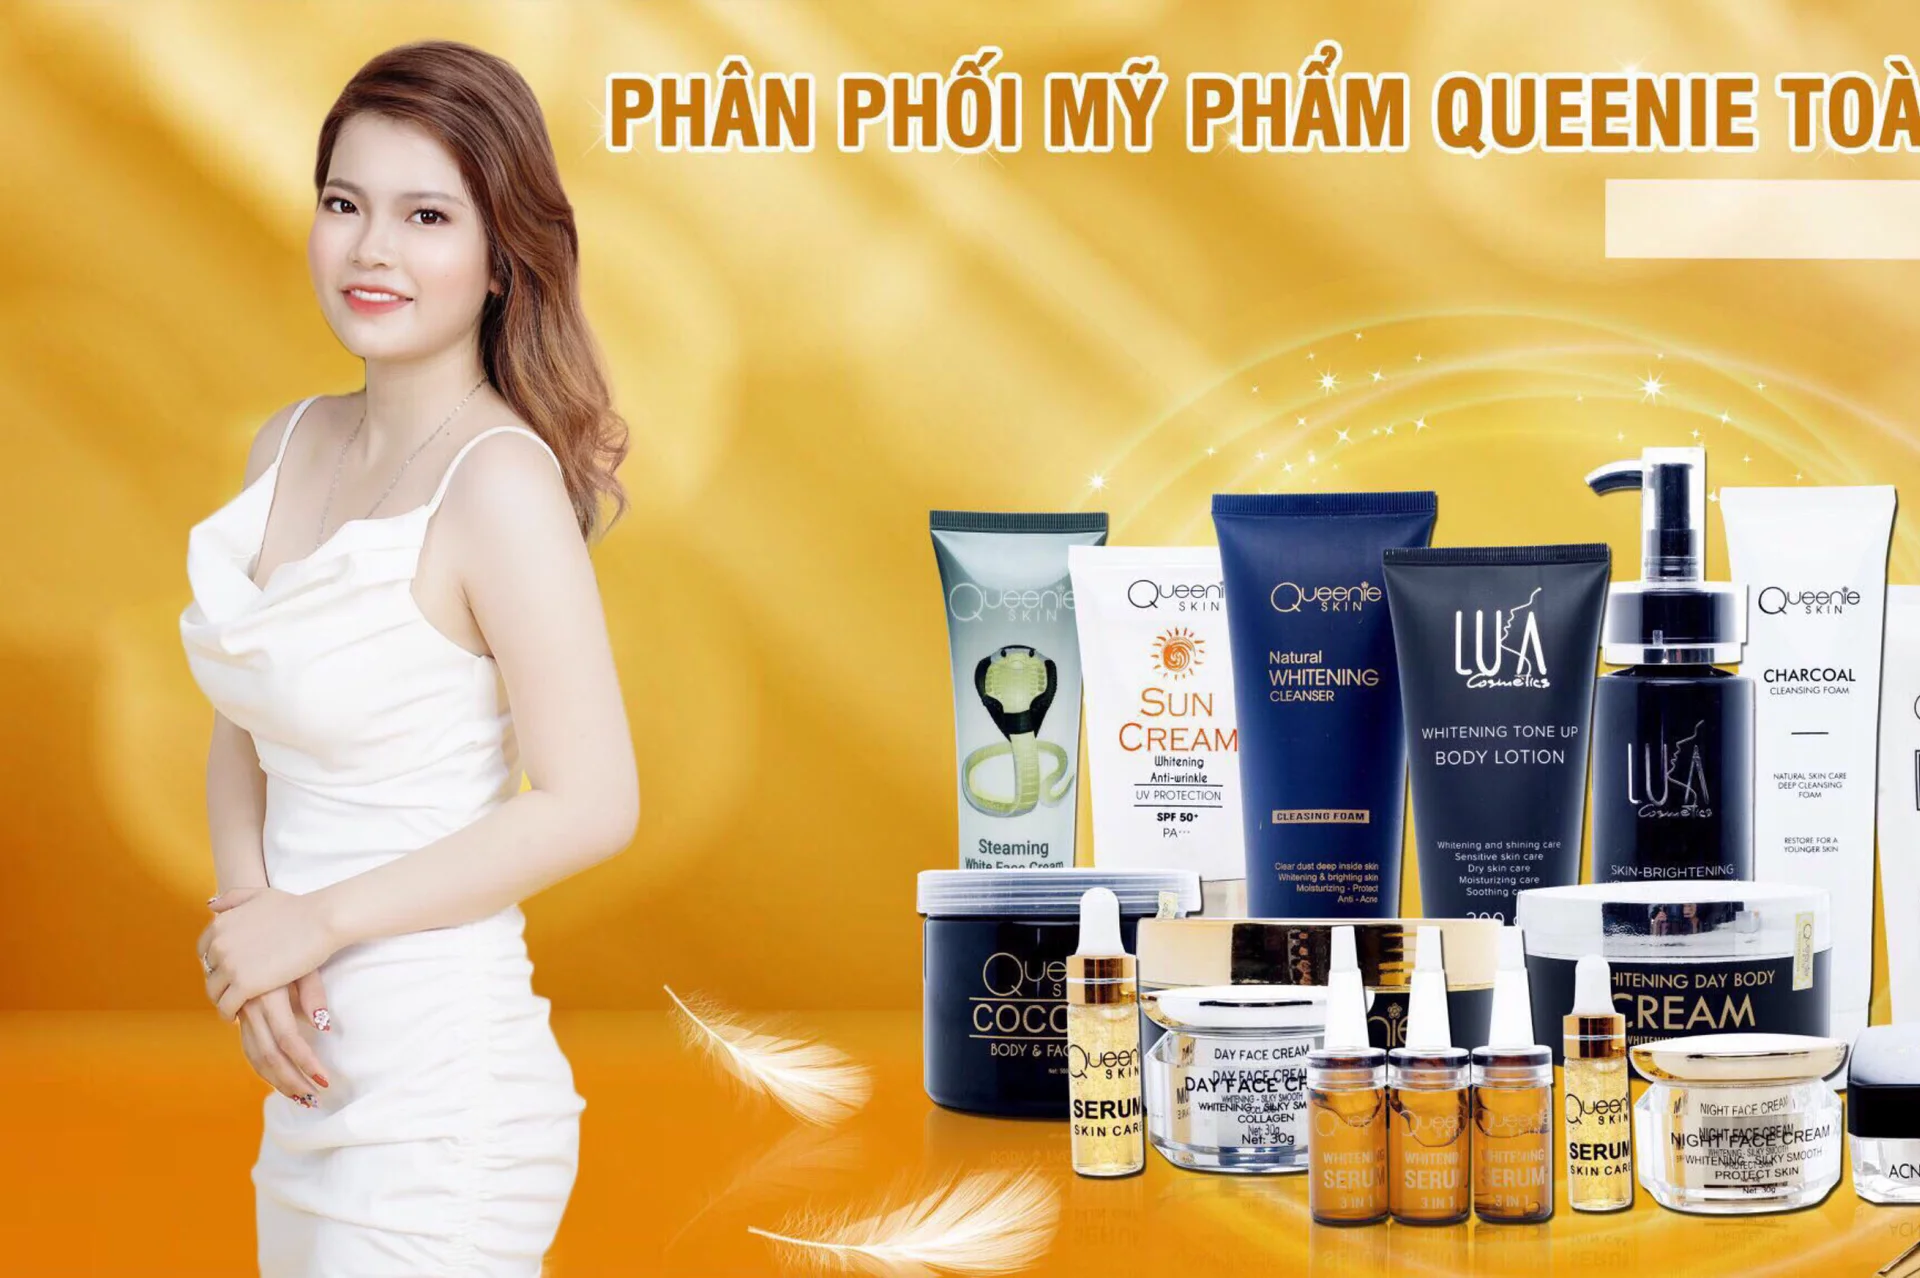 Lệ Thuỷ's cover photo